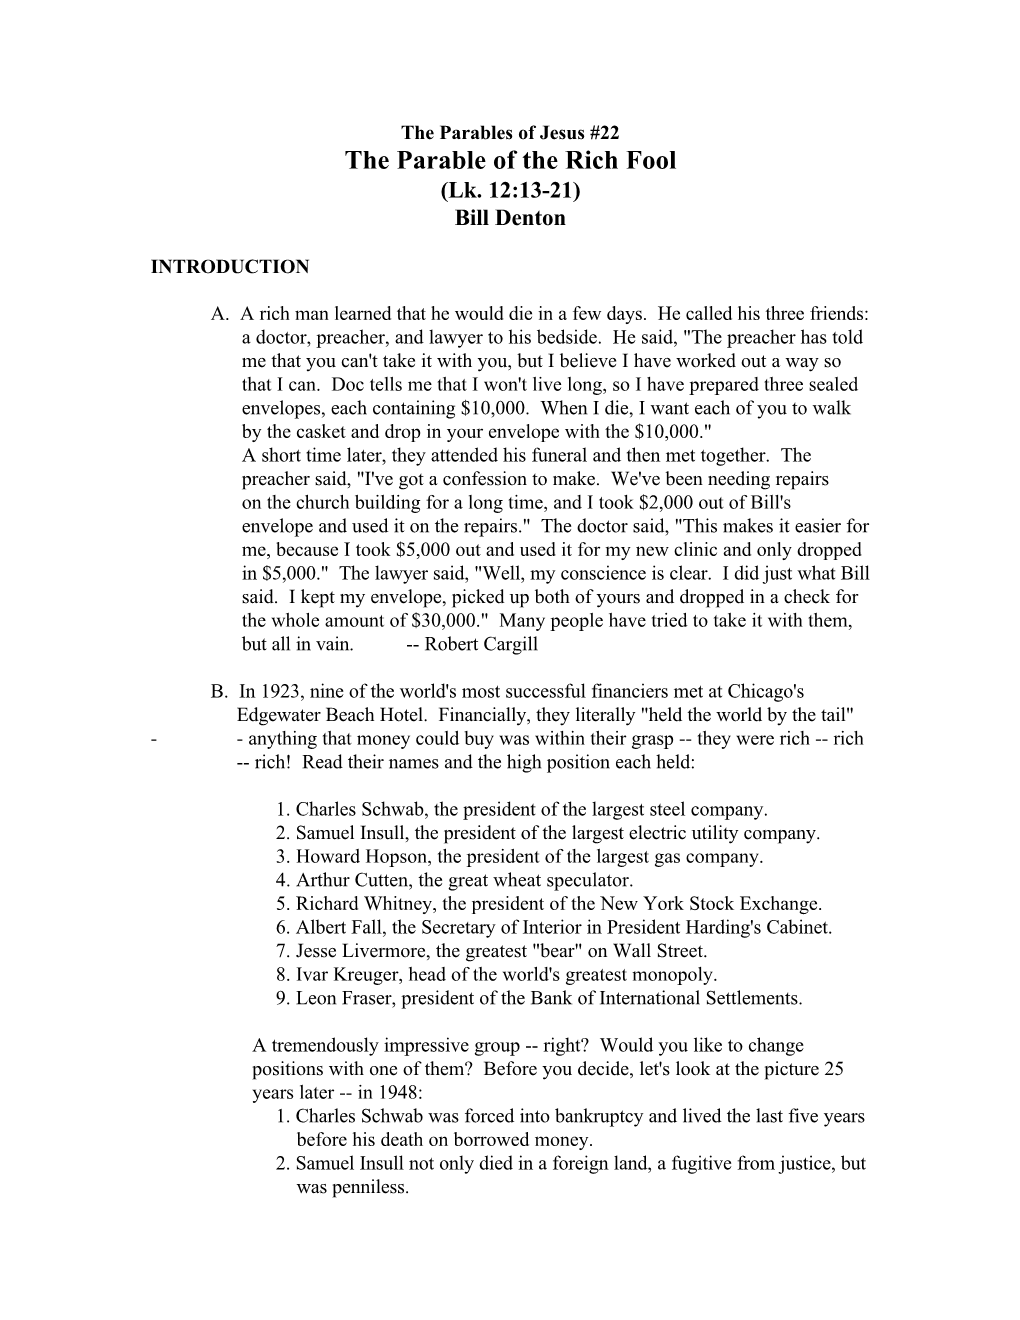 The Parable of the Rich Fool (Lk